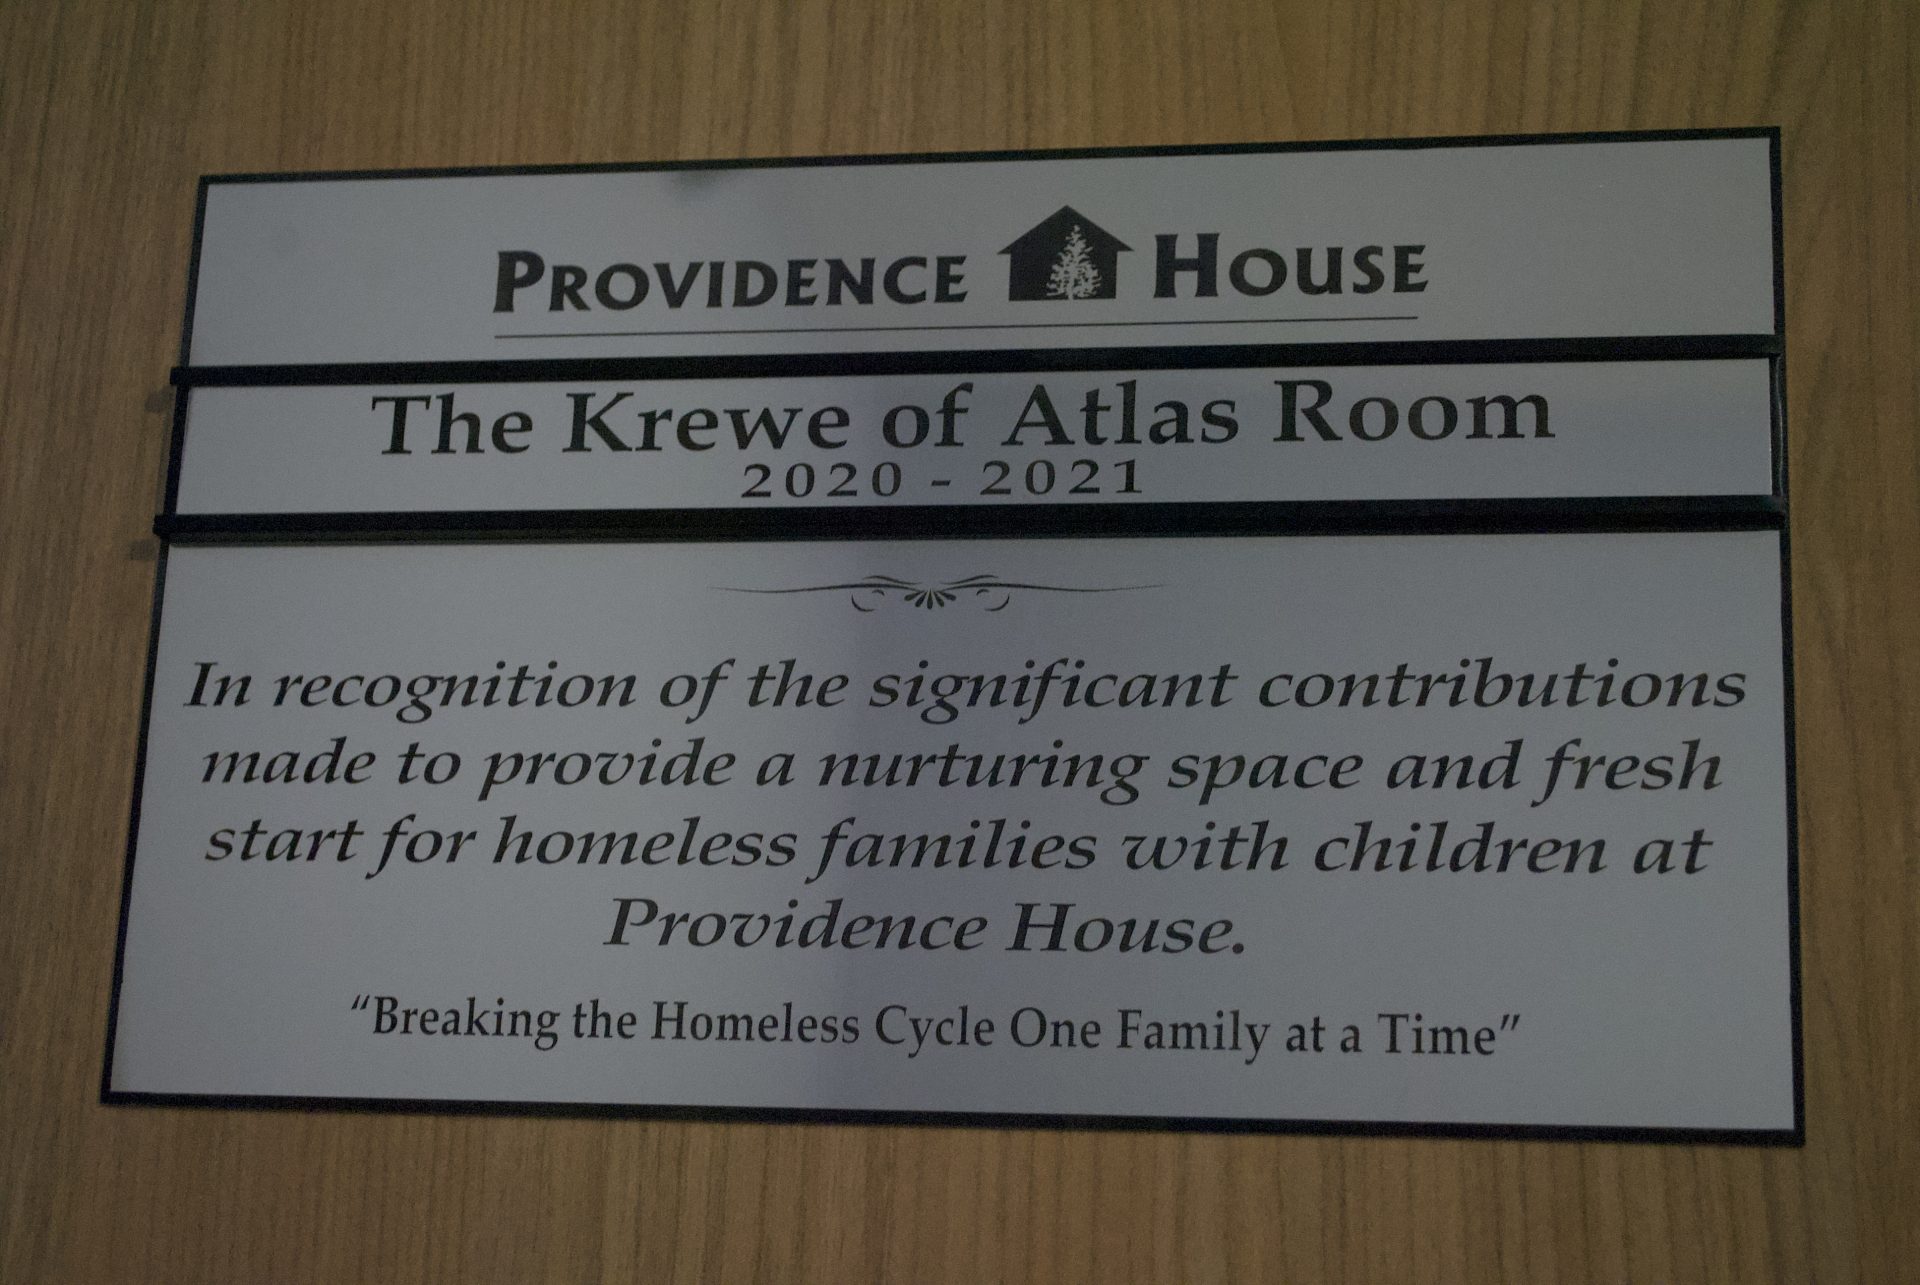 Providence House Names Room after the Krewe of Atlas in New Donation Program